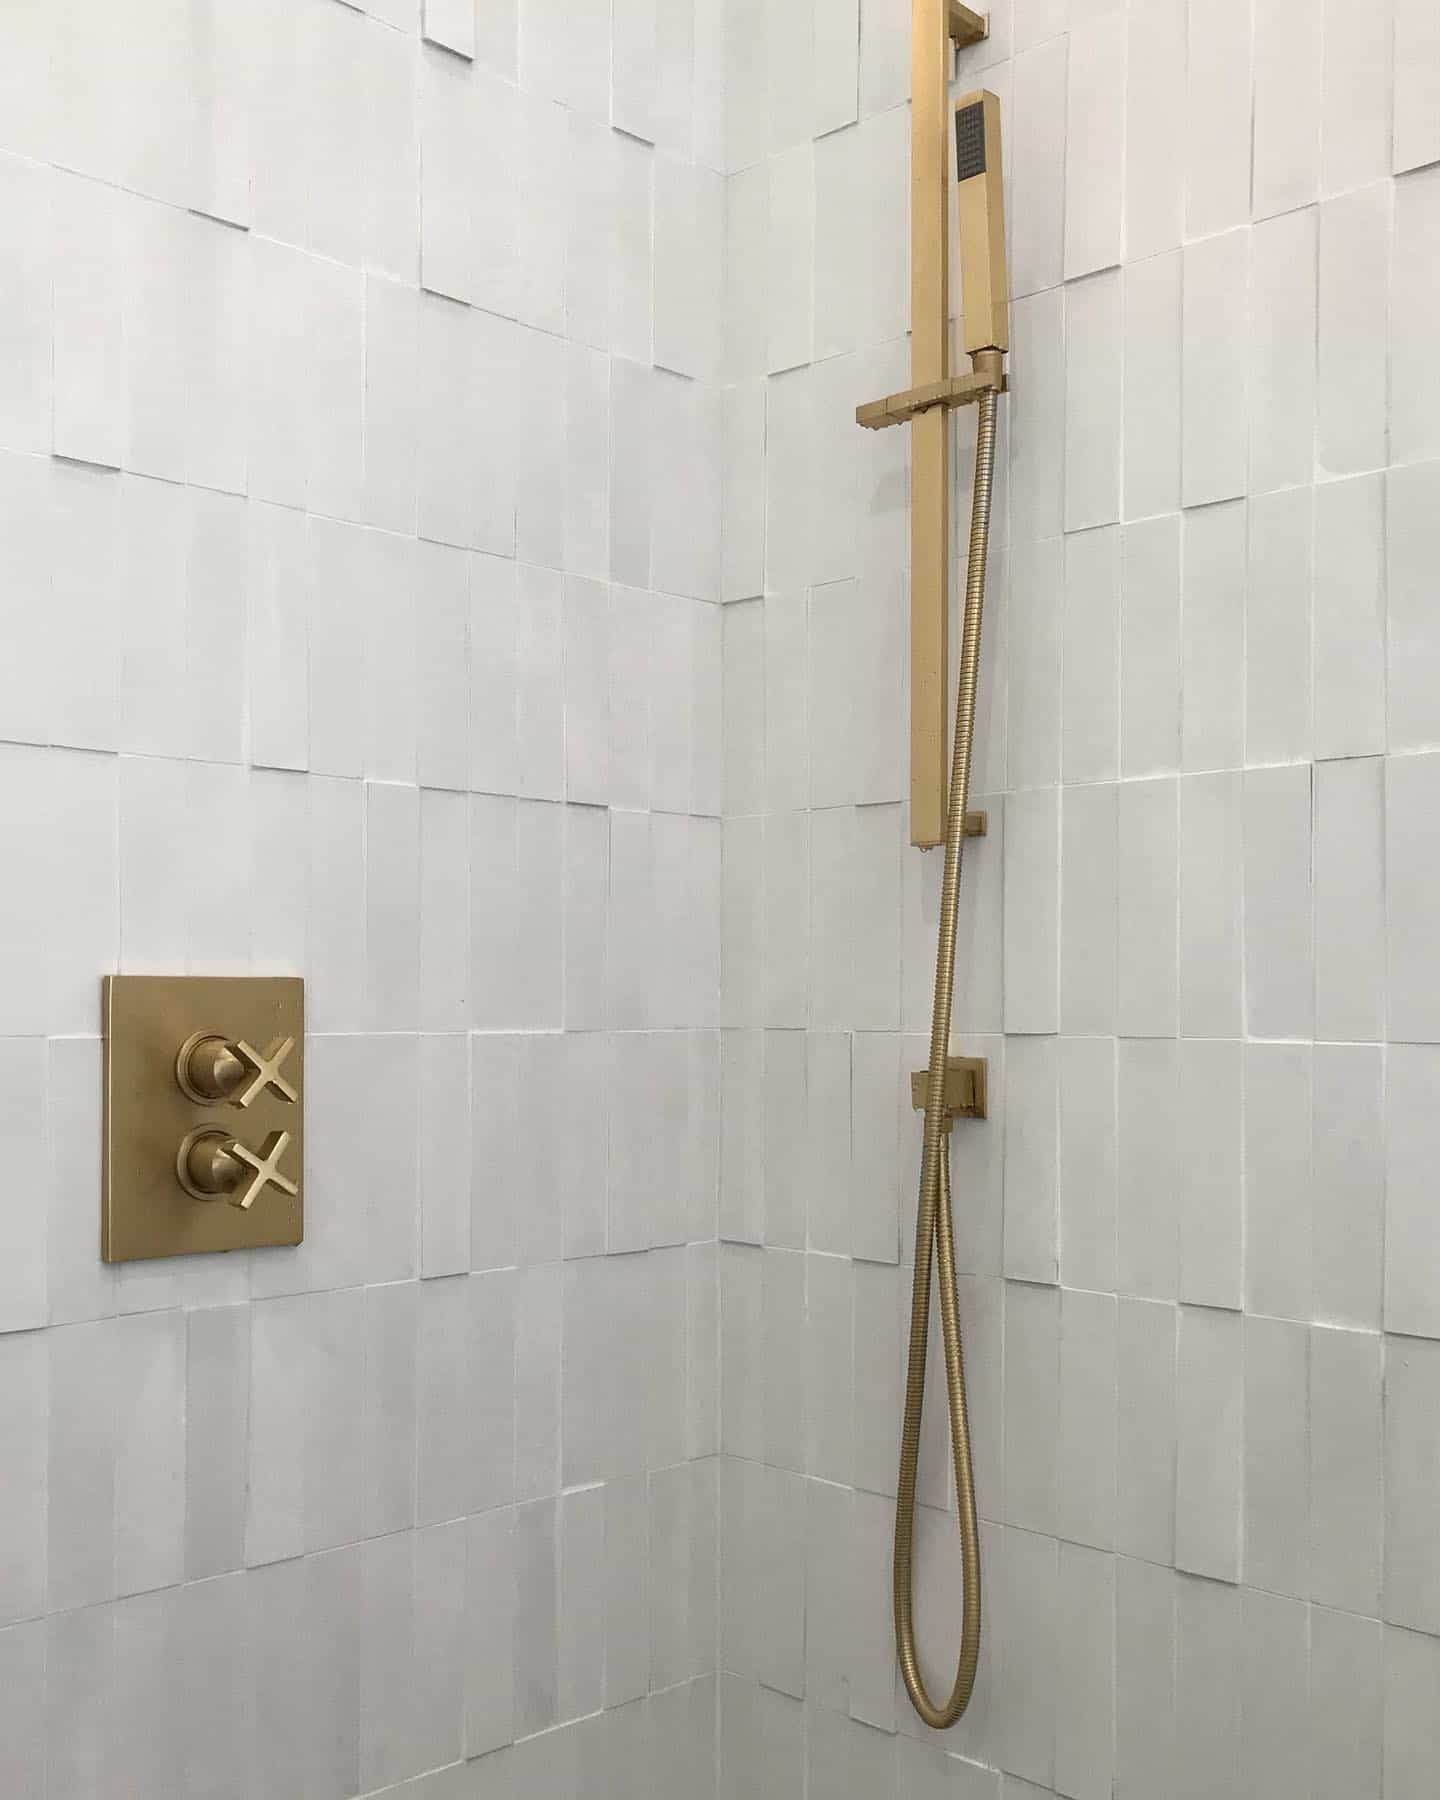 Vertical stack textured white tile in shower with brass accents including faucet and handles.